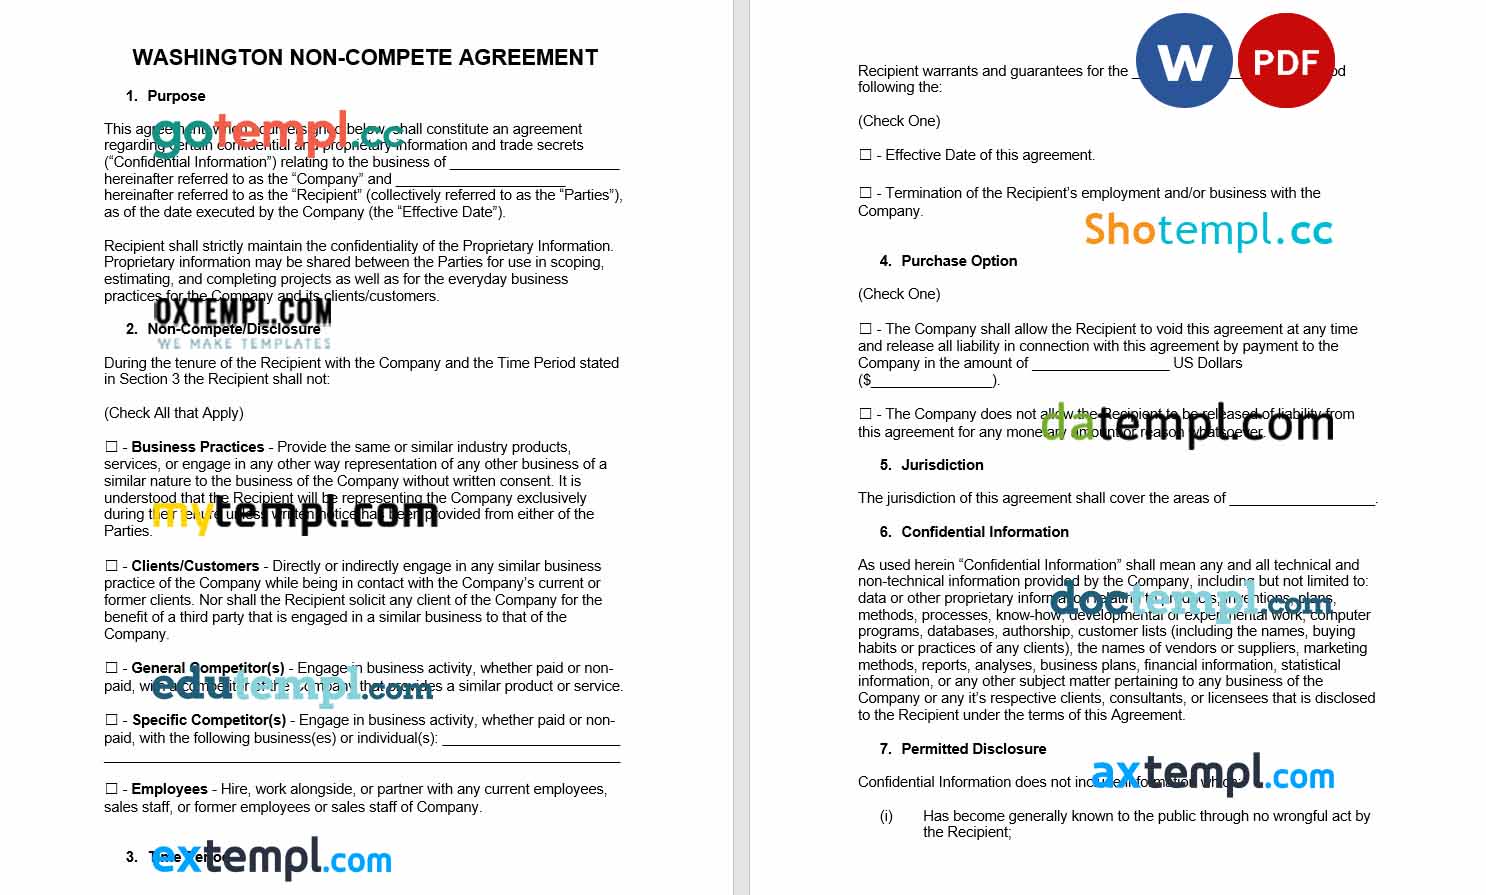 Washington non-compete agreement template, Word and PDF format